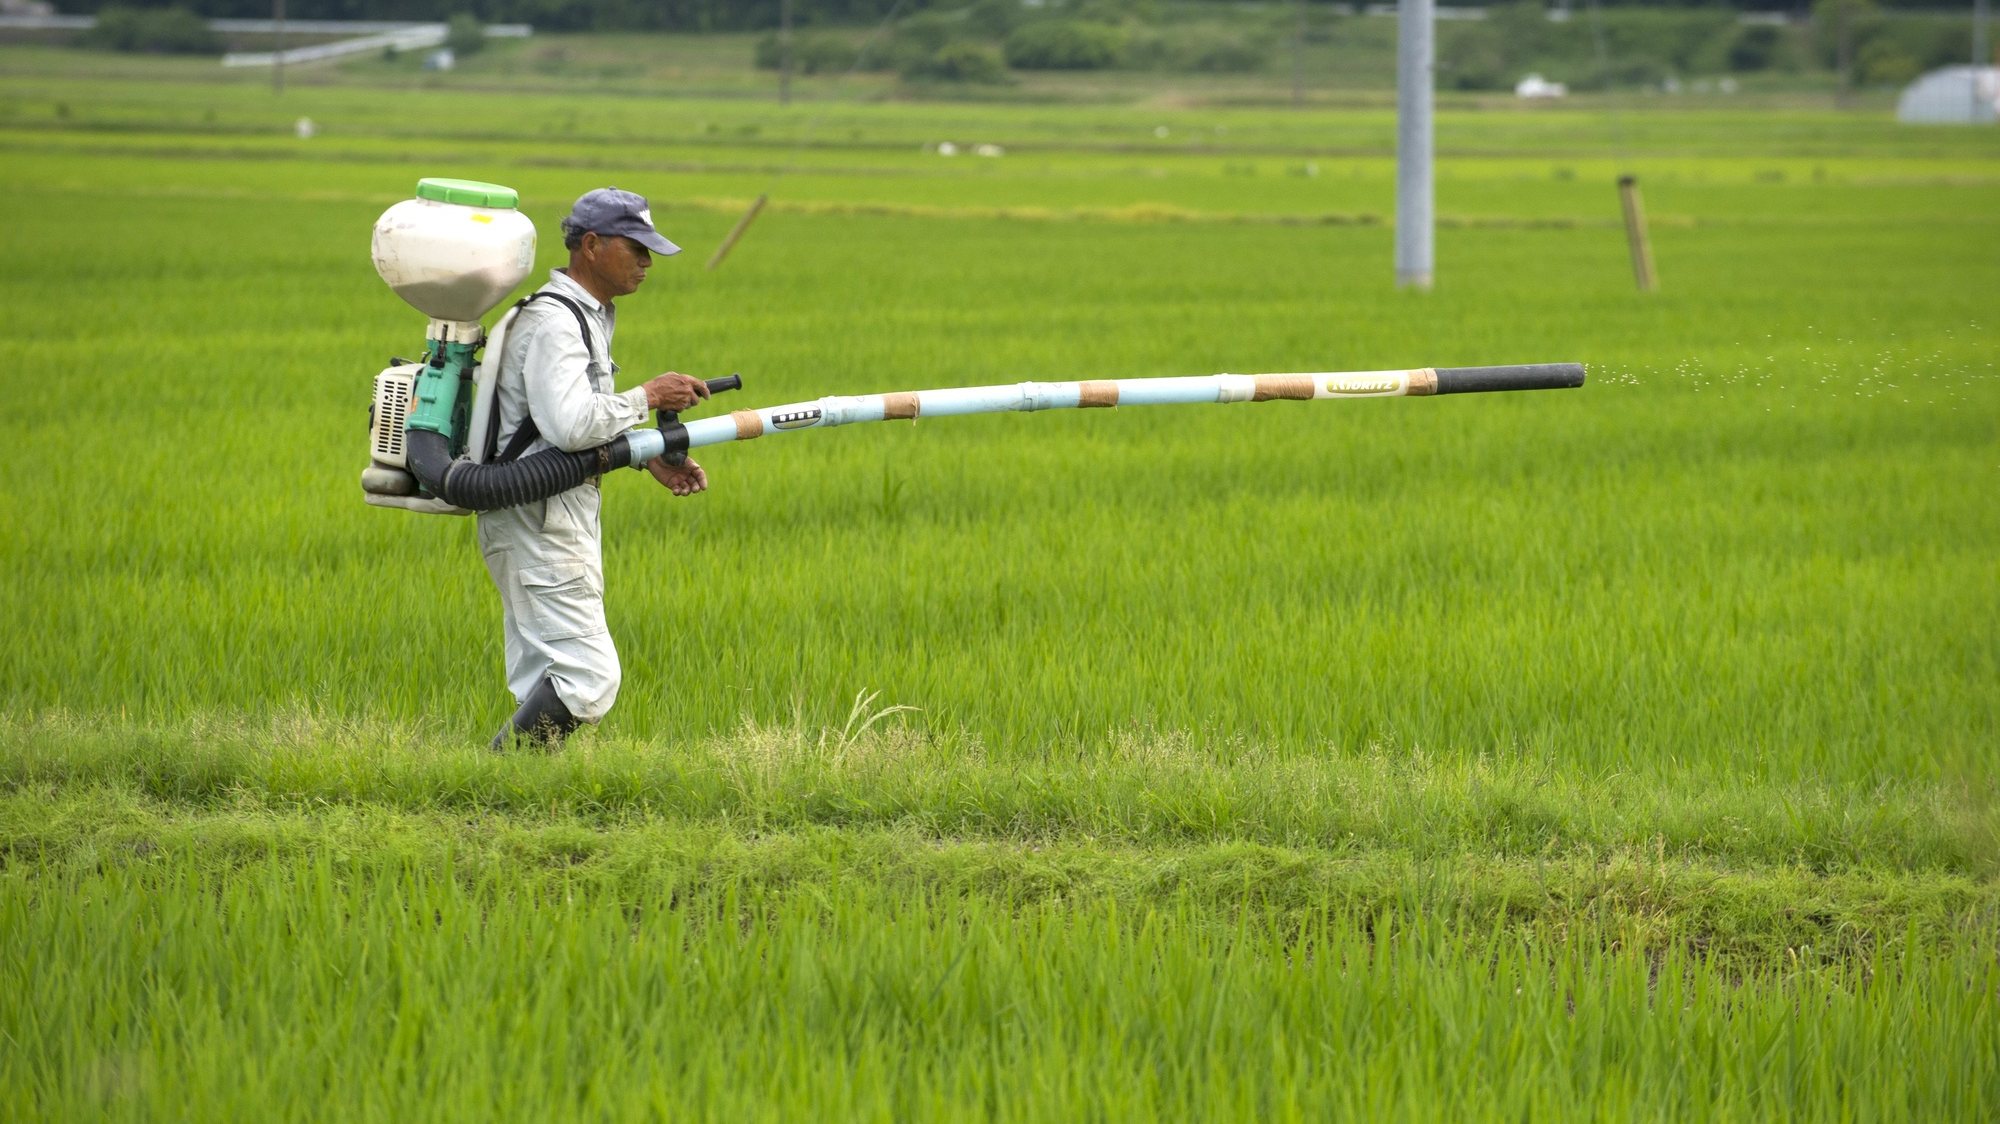 epa06042885 A Japanese farmer spreads fertilizer in a rice paddy in Isumi city, Chiba prefecture, Japan, 22 June 2017. Japanese farmers traditionally planted rice during the rainy season which lasts from mid June to mid July. This year&#039;s rain fall has been unusually scarce according to local farmers.  EPA/EVERETT KENNEDY BROWN